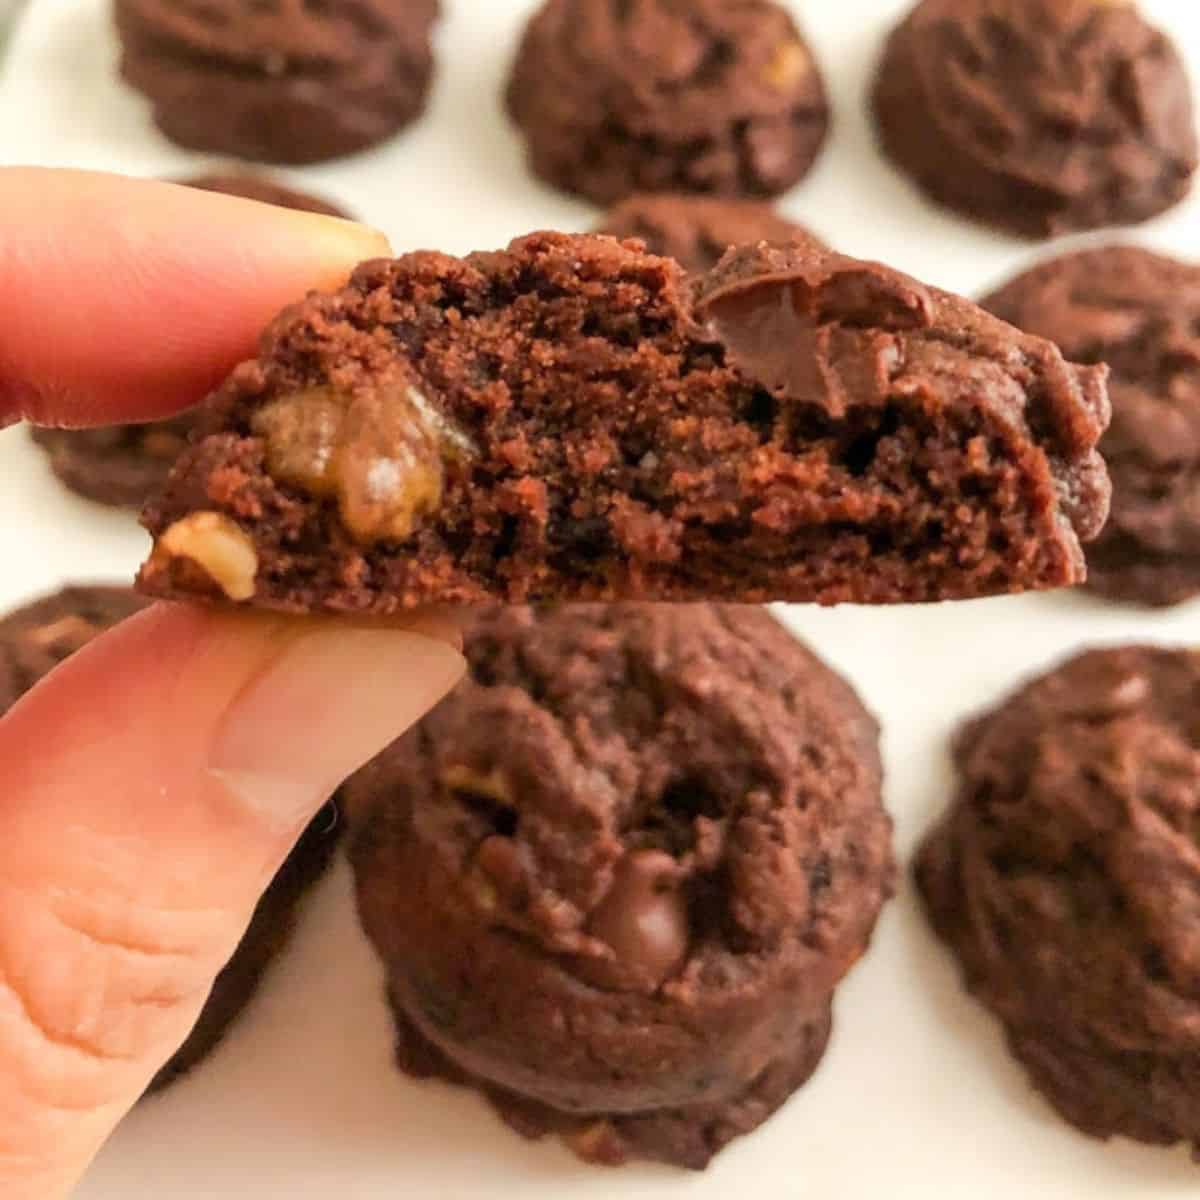 Hand holding brownie cookie with bite taken out of it.  Additional cookies in the background on parchment paper.